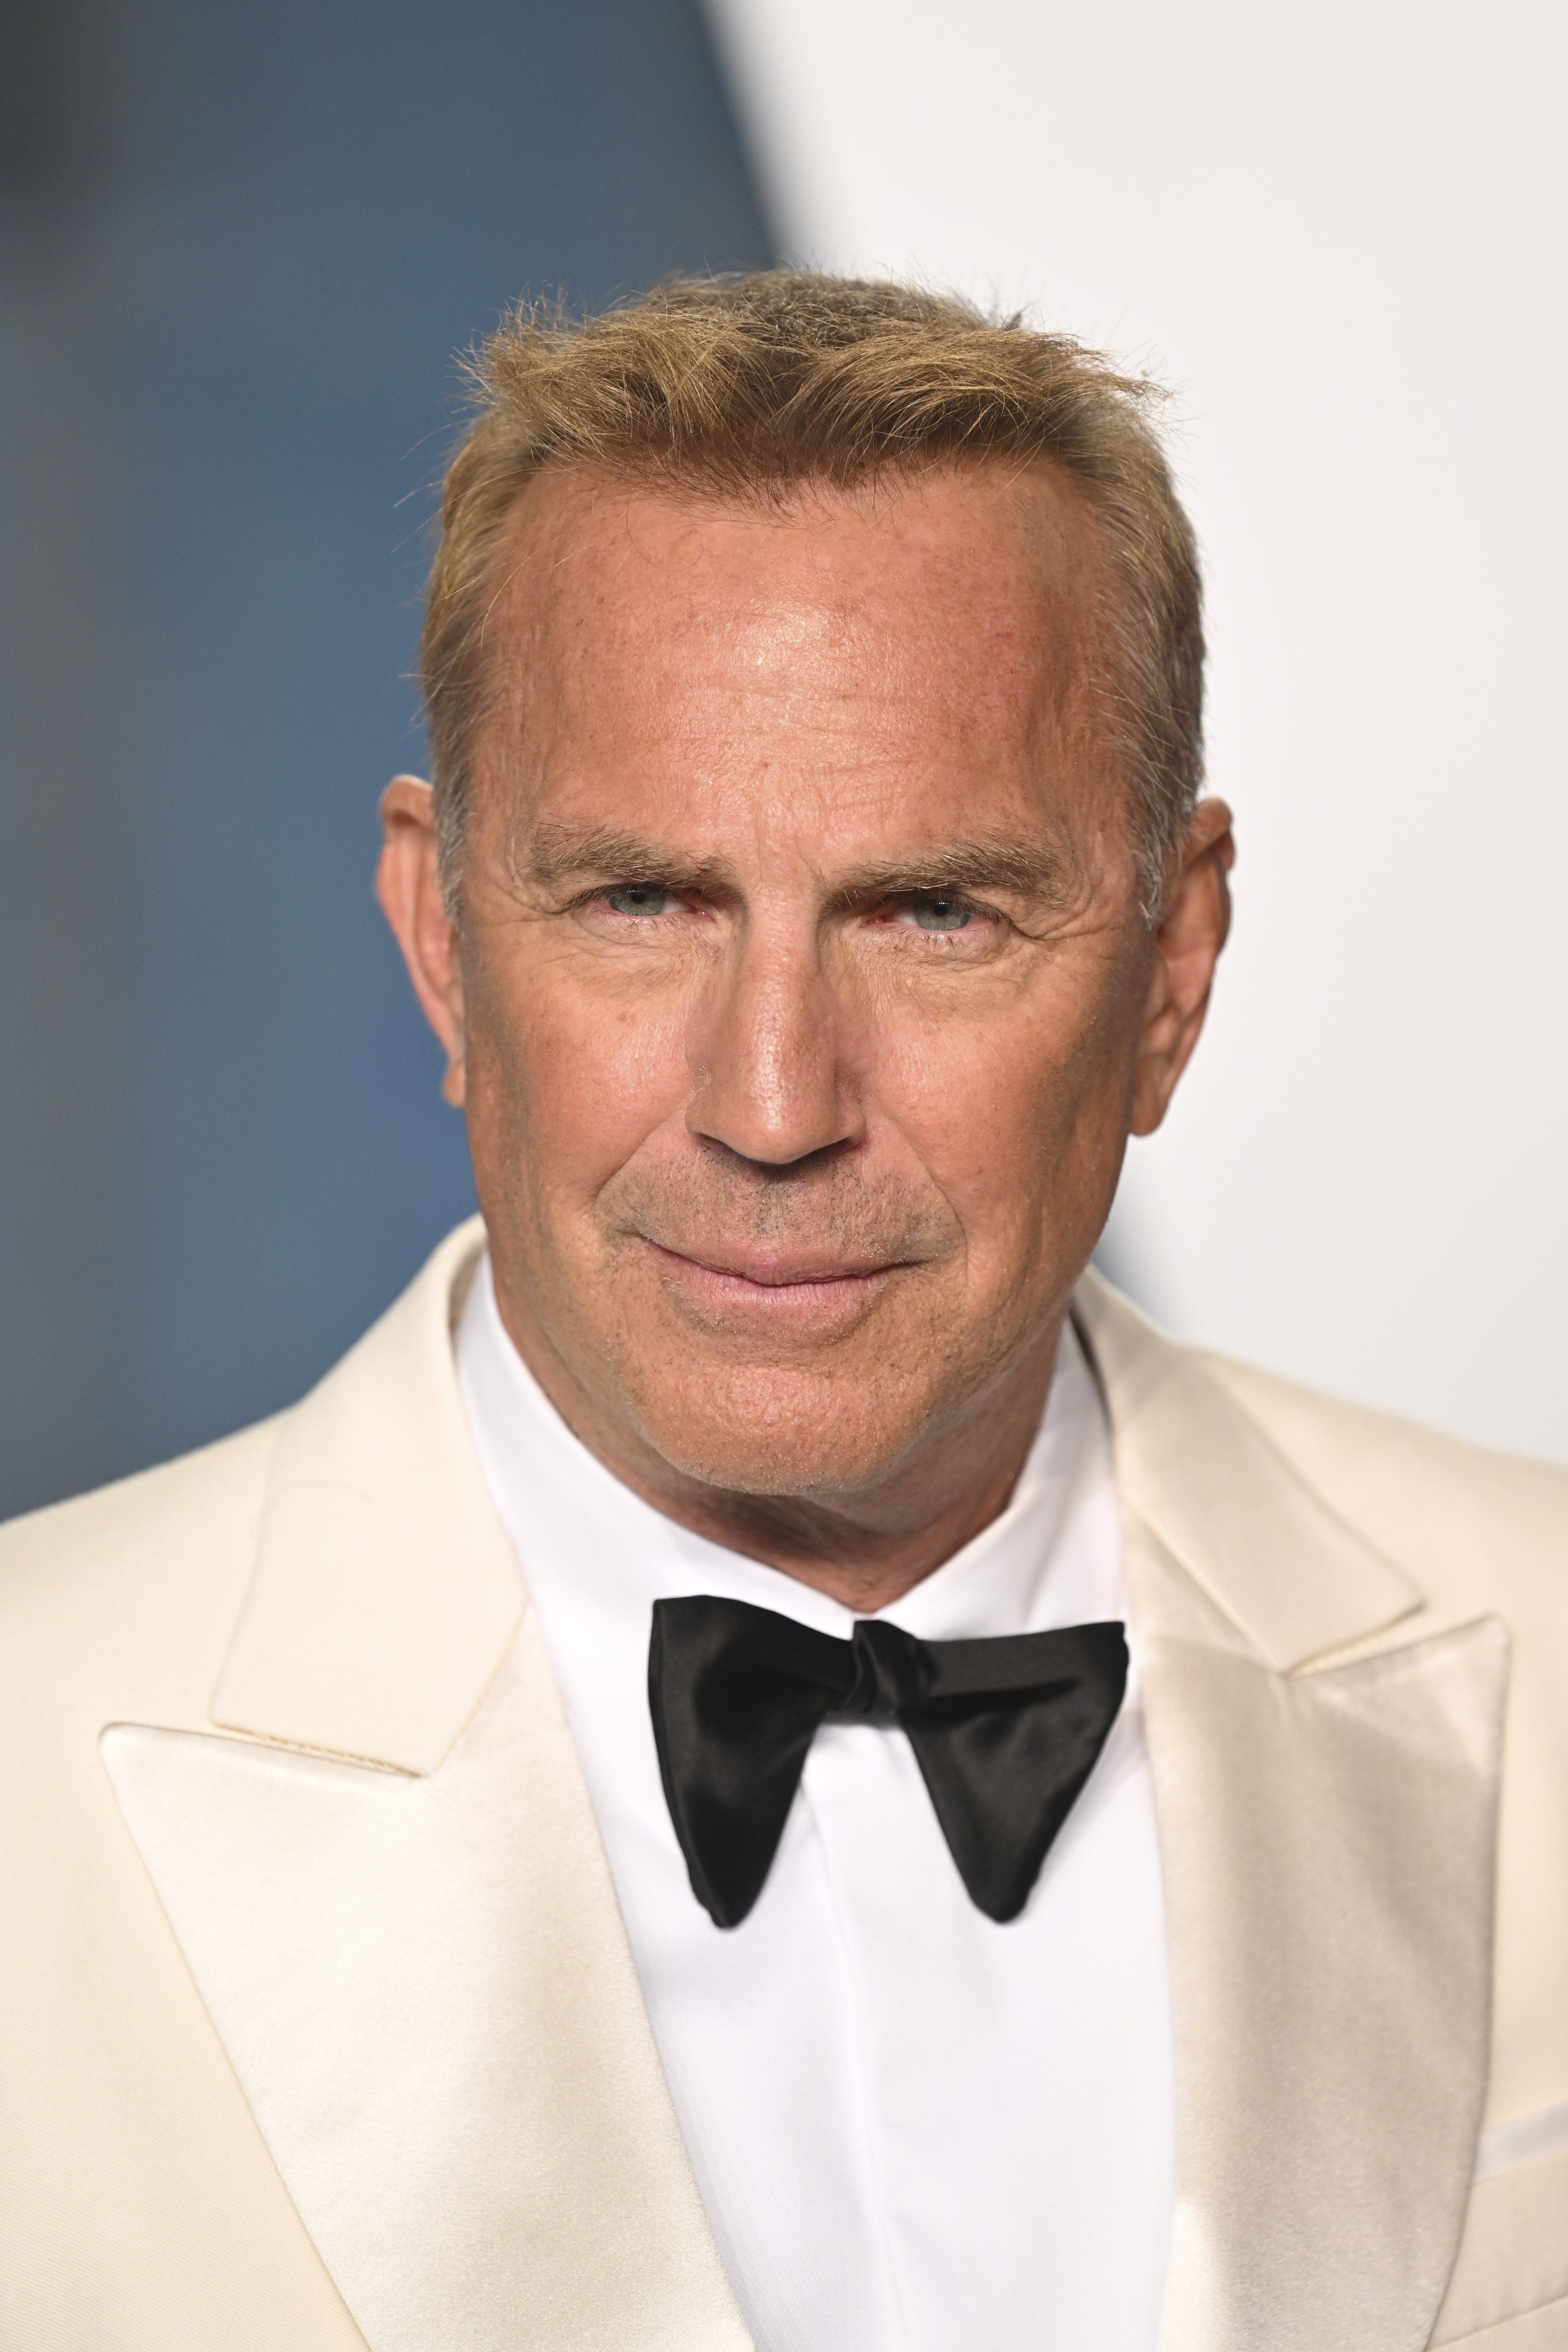 Kevin Costner at the Vanity Fair Oscar Party on March 27, 2022, in Beverly Hills, California. | Source: Getty Images